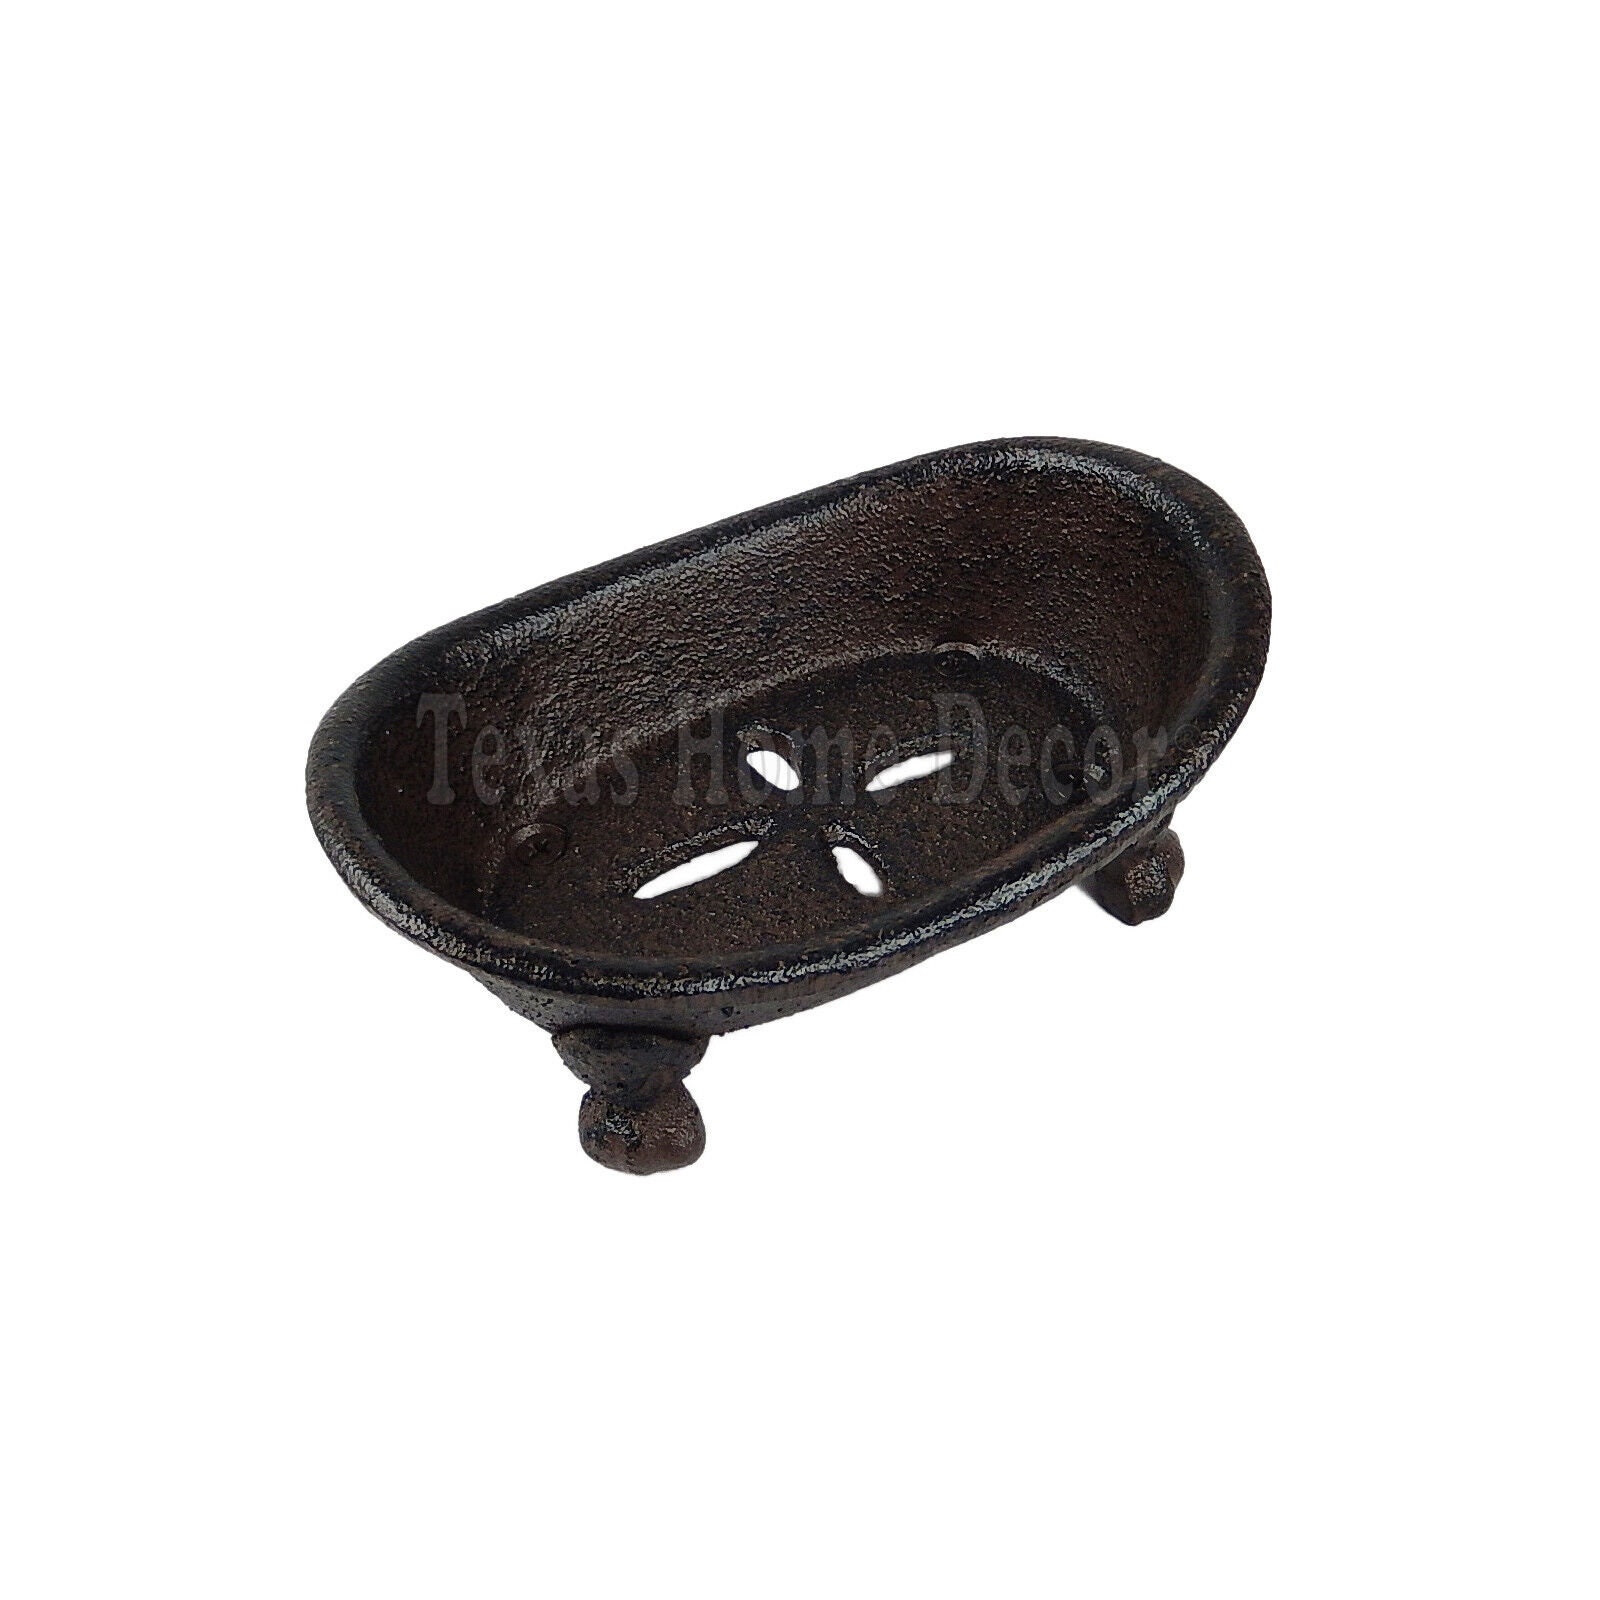 Steel Bathtub Cast Iron Bahthub with Handles - China Cast Iron Bathtub,  Bathtub